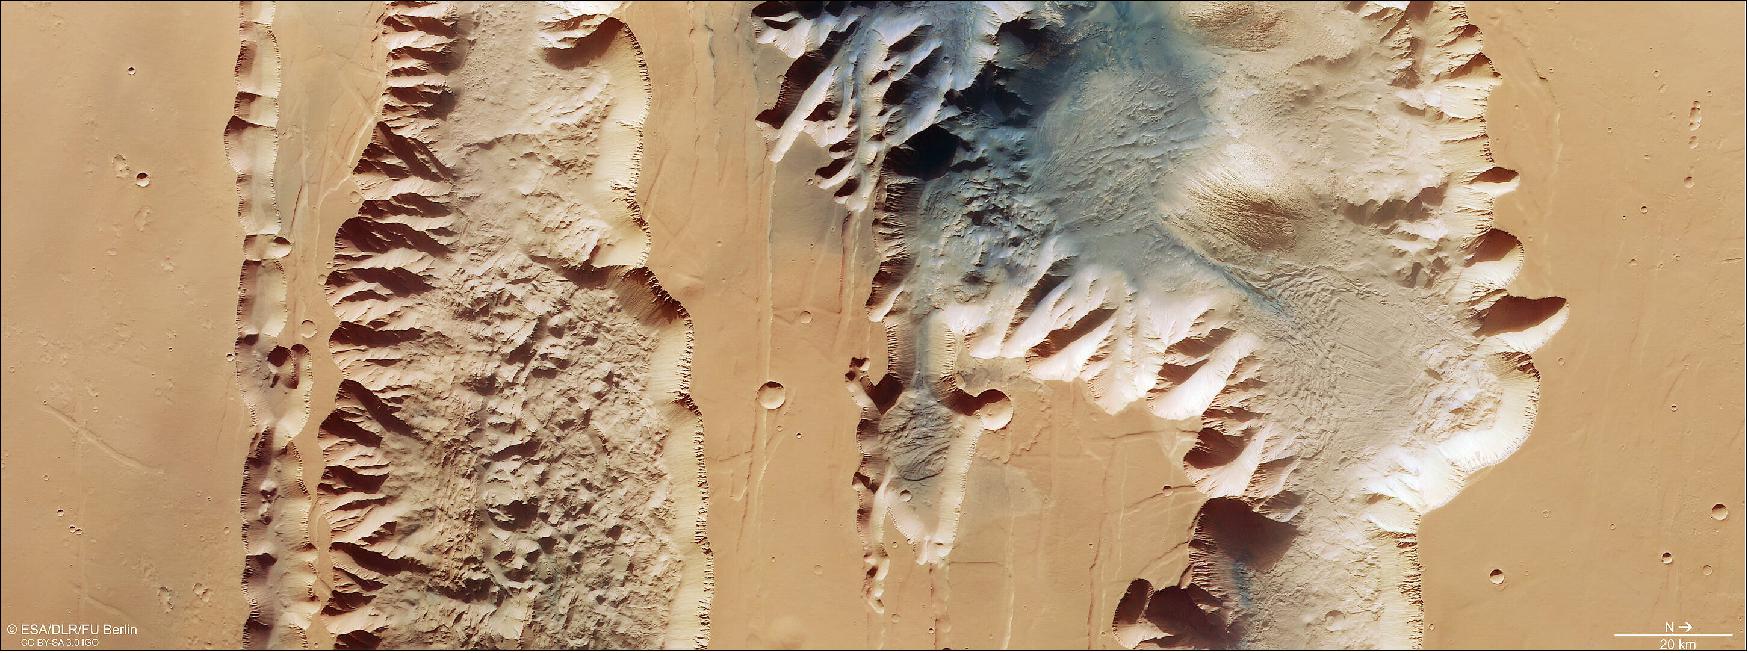 Figure 5: This image from ESA’s Mars Express shows Ius and Tithonium Chasmata, which form part of Mars’ Valles Marineris canyon structure. This image comprises data gathered by Mars Express’ High Resolution Stereo Camera (HRSC) on 21 April 2022. It was created using data from the nadir channel, the field of view aligned perpendicular to the surface of Mars, and the colour channels of the HRSC. It is a ‘true colour’ image, reflecting what would be seen by the human eye if looking at this region of Mars. - The ground resolution is approximately 25 m/pixel and the image is centred at about 272ºE/6ºS. North is to the right. Click here to see a version of this image with the main features annotated (image credit: ESA/DLR/FU Berlin, CC BY-SA 3.0 IGO)